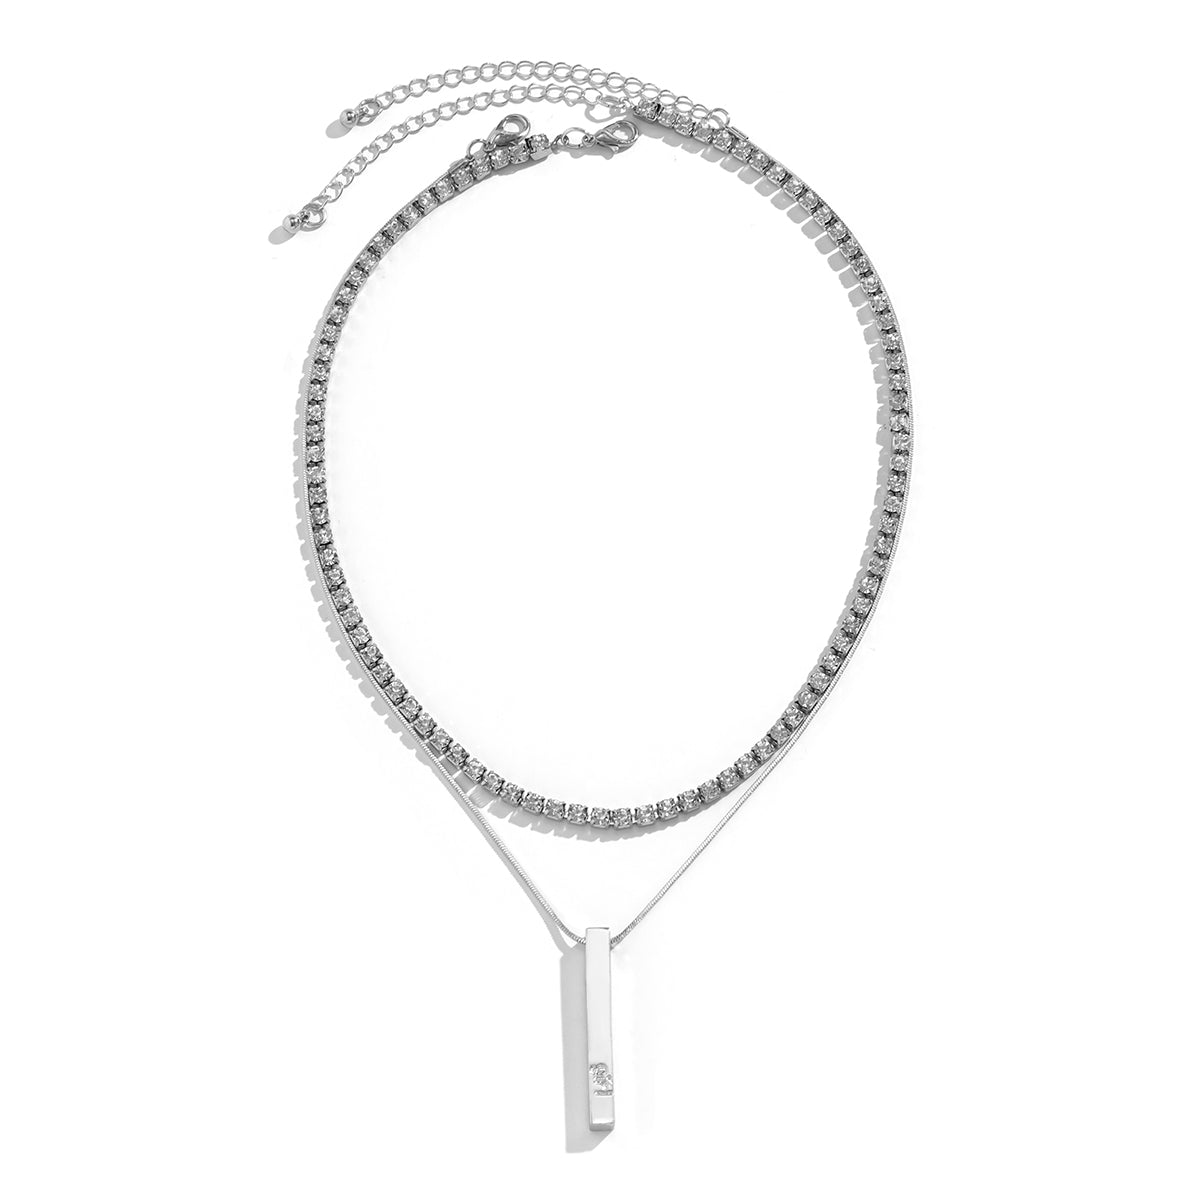 Cubic Zirconia & Silver-Plated 'Girl' Bar Pendant Necklace Set